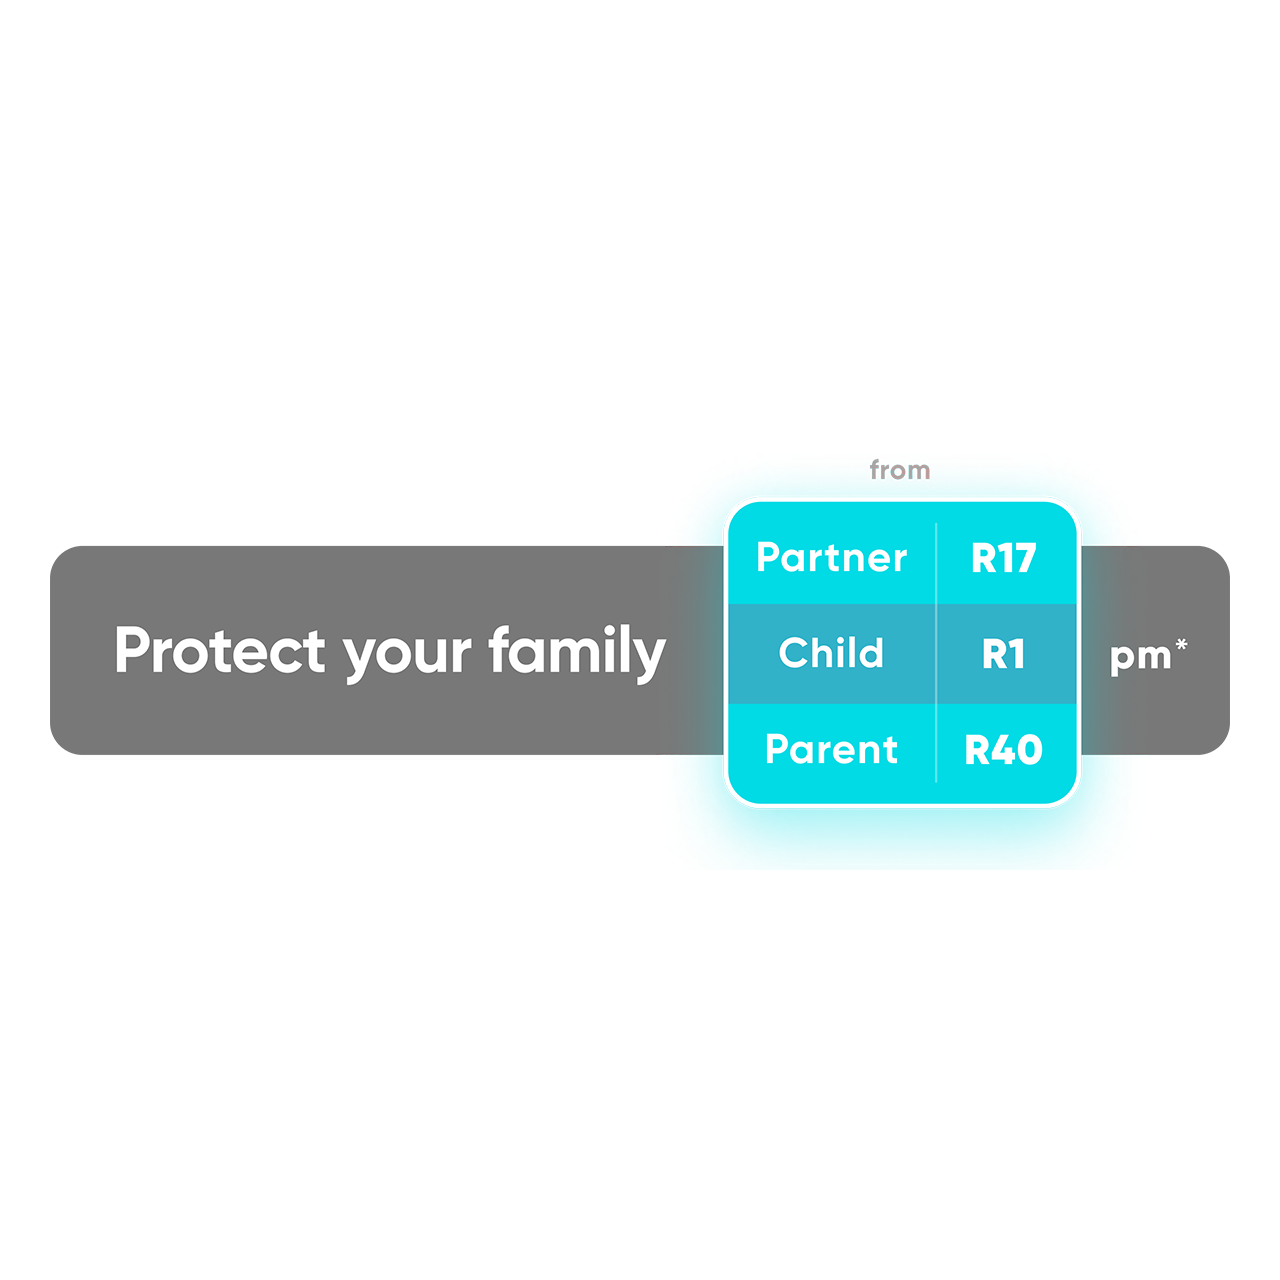 Protect your family